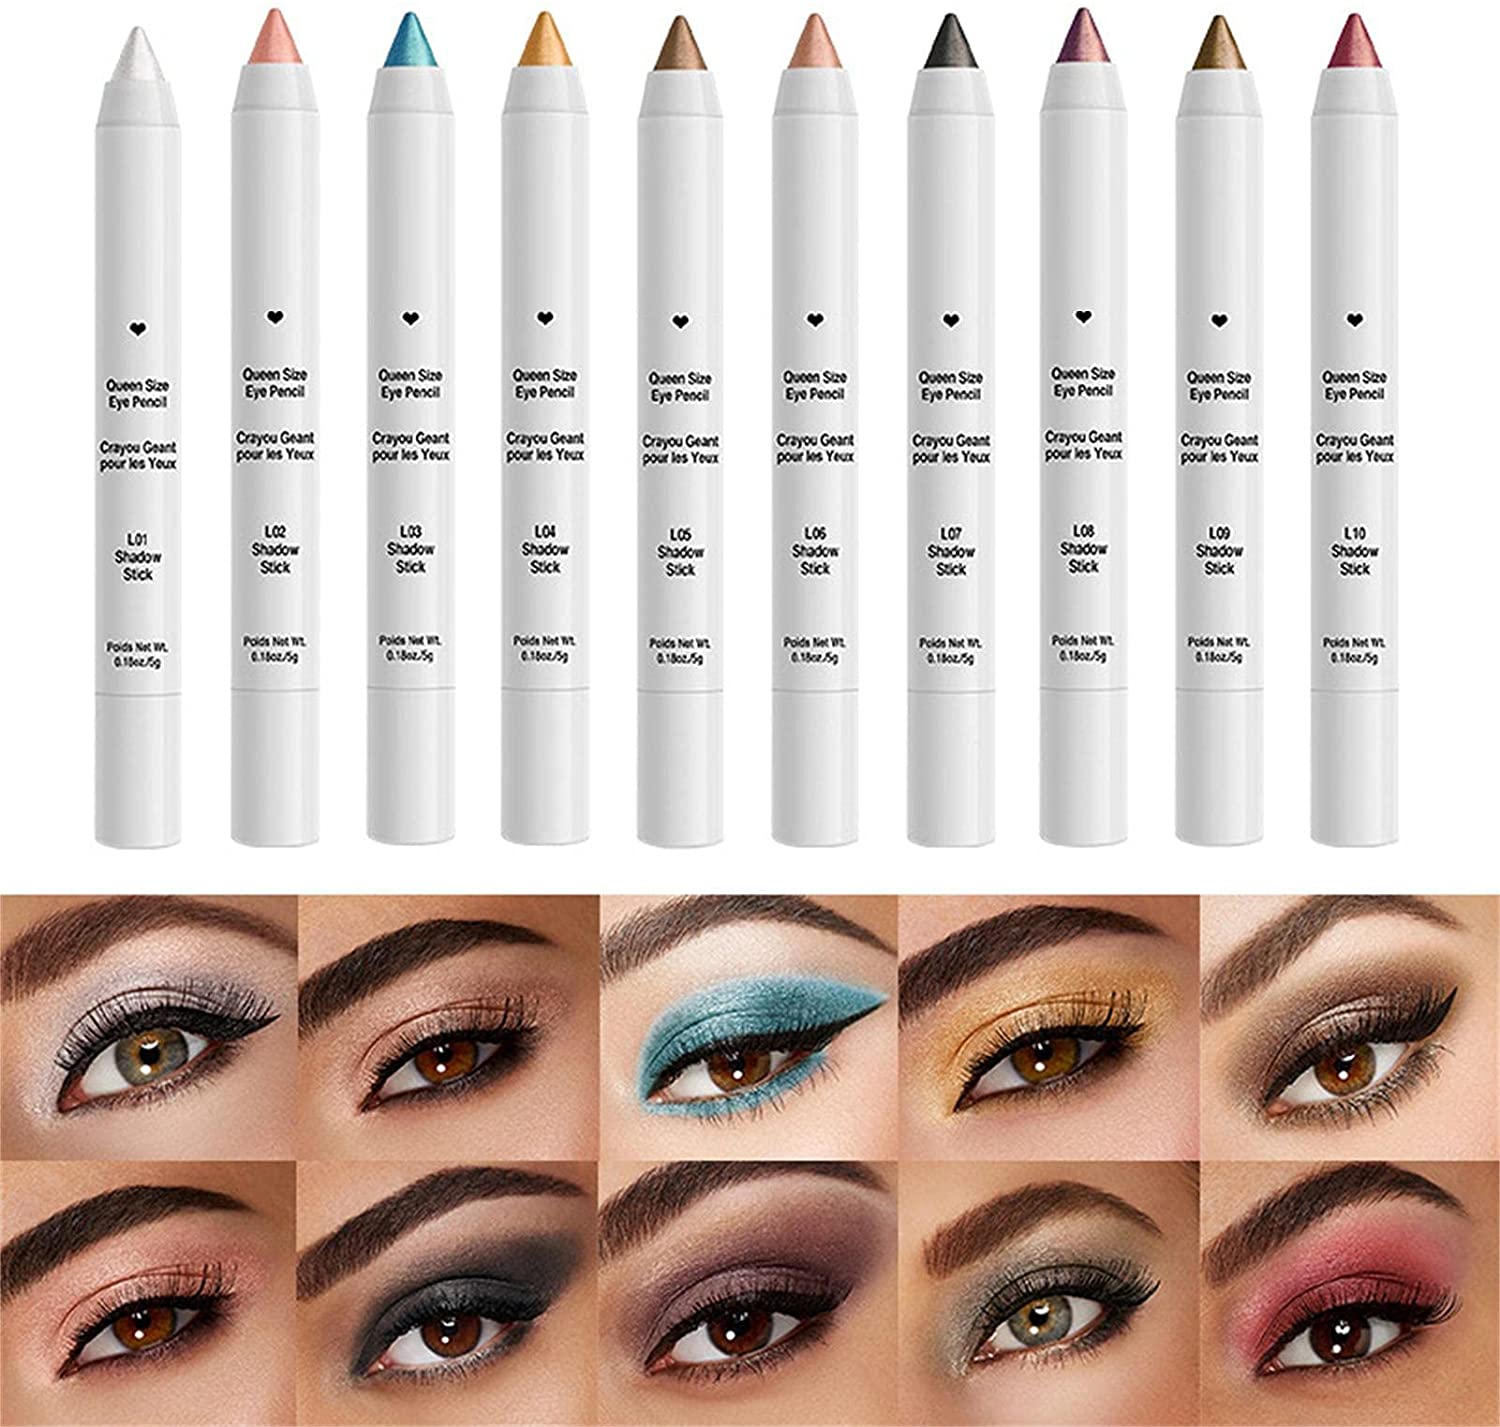 Xianghaoshun 10 Colour Eye Pencil Eyeshadow Highlighter, Eyeliner Crayon Glitter Shimmer, Eye Shadow & Eyeliner Pencil with Sharpener, Durable, Smudgeproof, Easy to Draw Eye Makeup, 